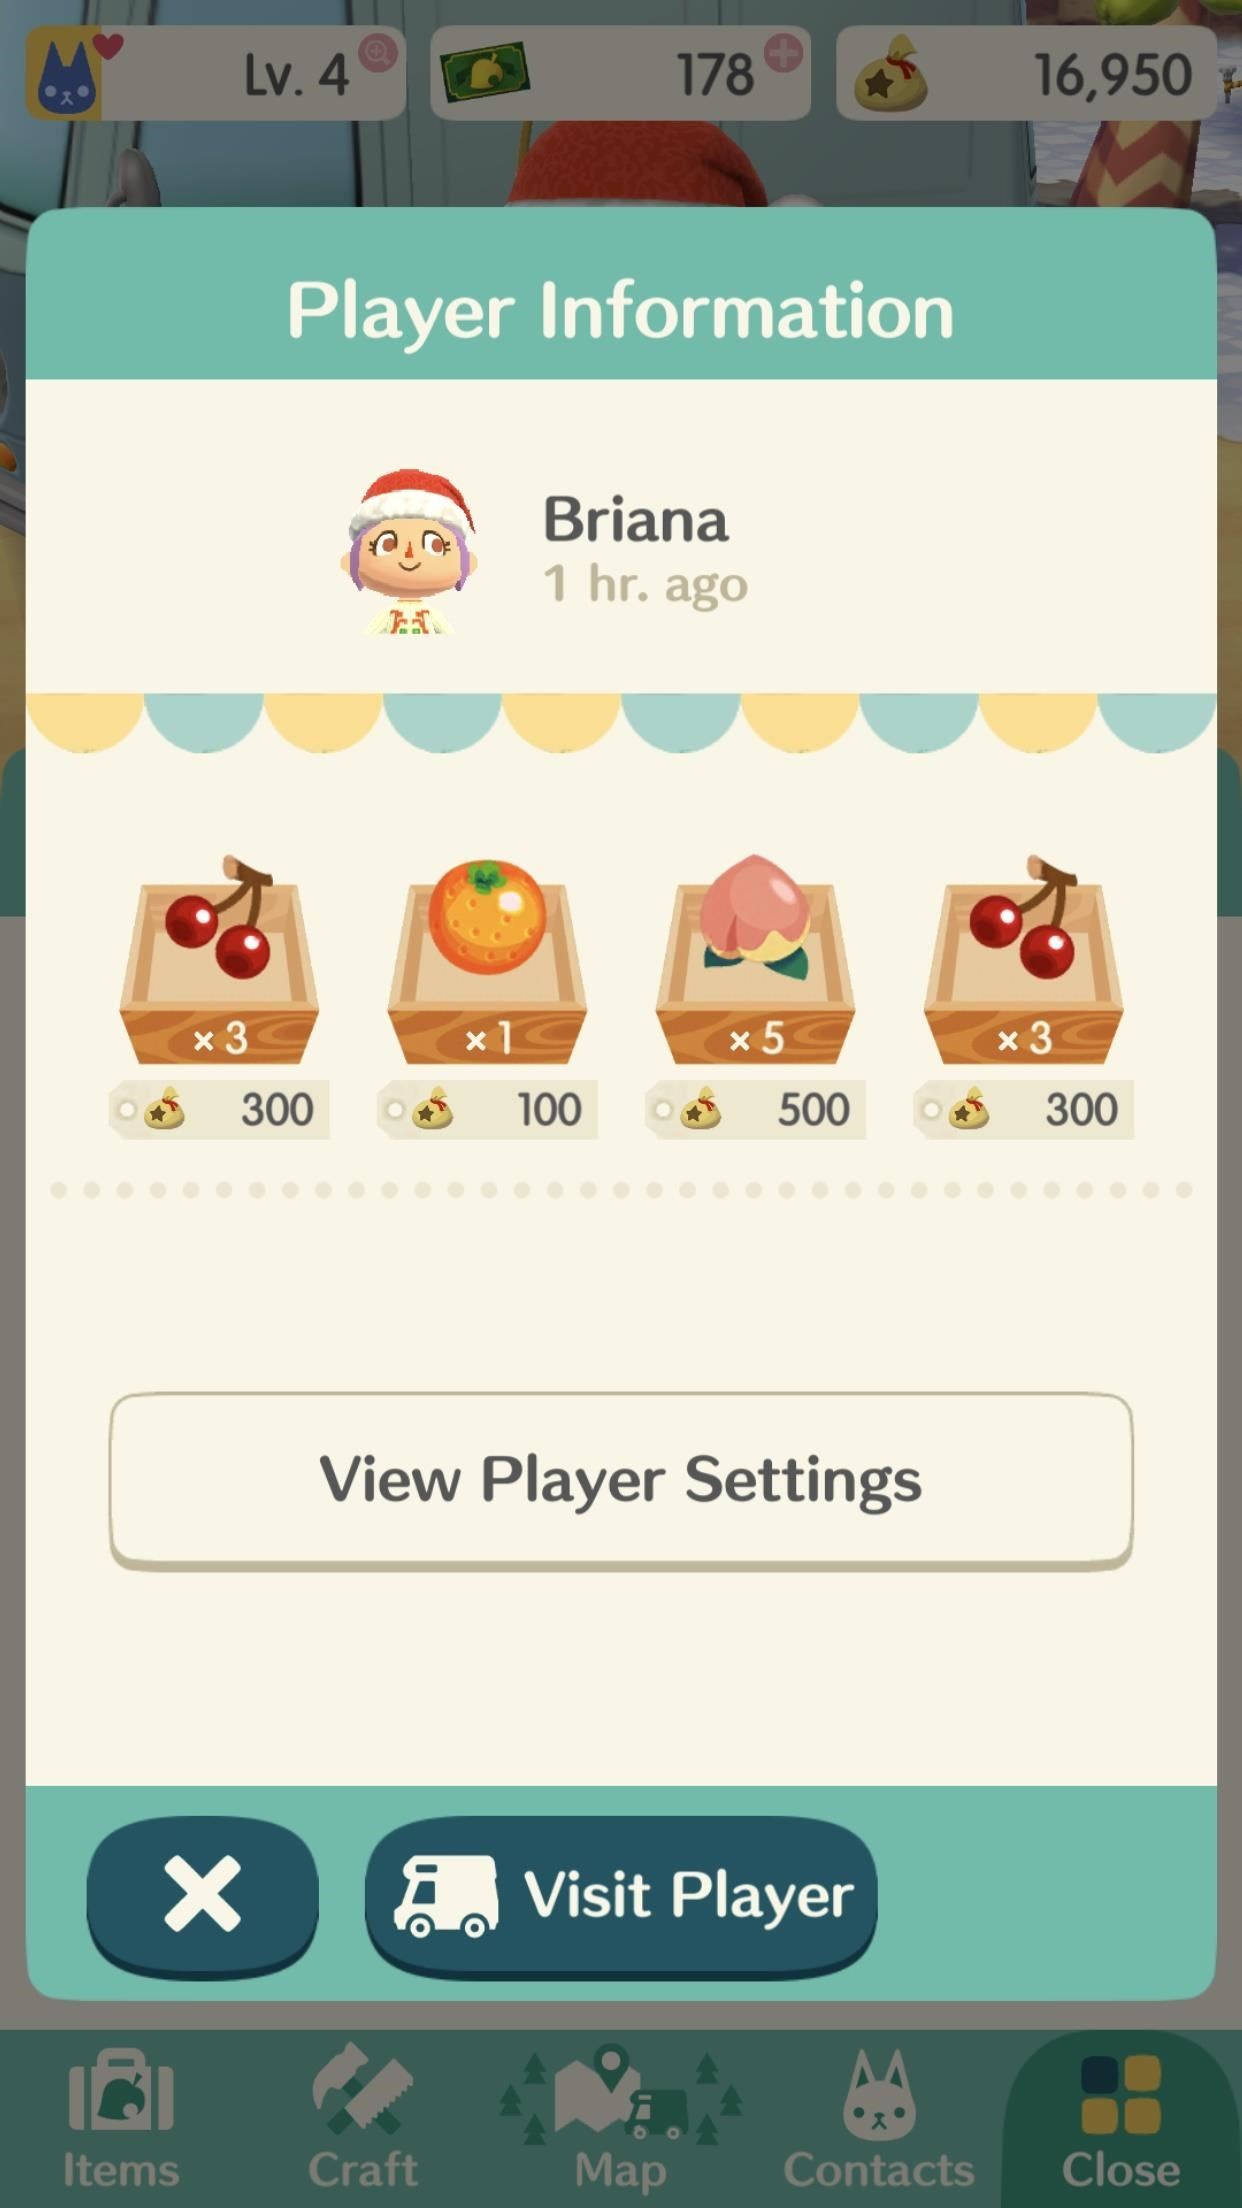 Pocket Camp 101: How to Use Market Boxes to Buy & Sell Items with Other Animal Crossing Players